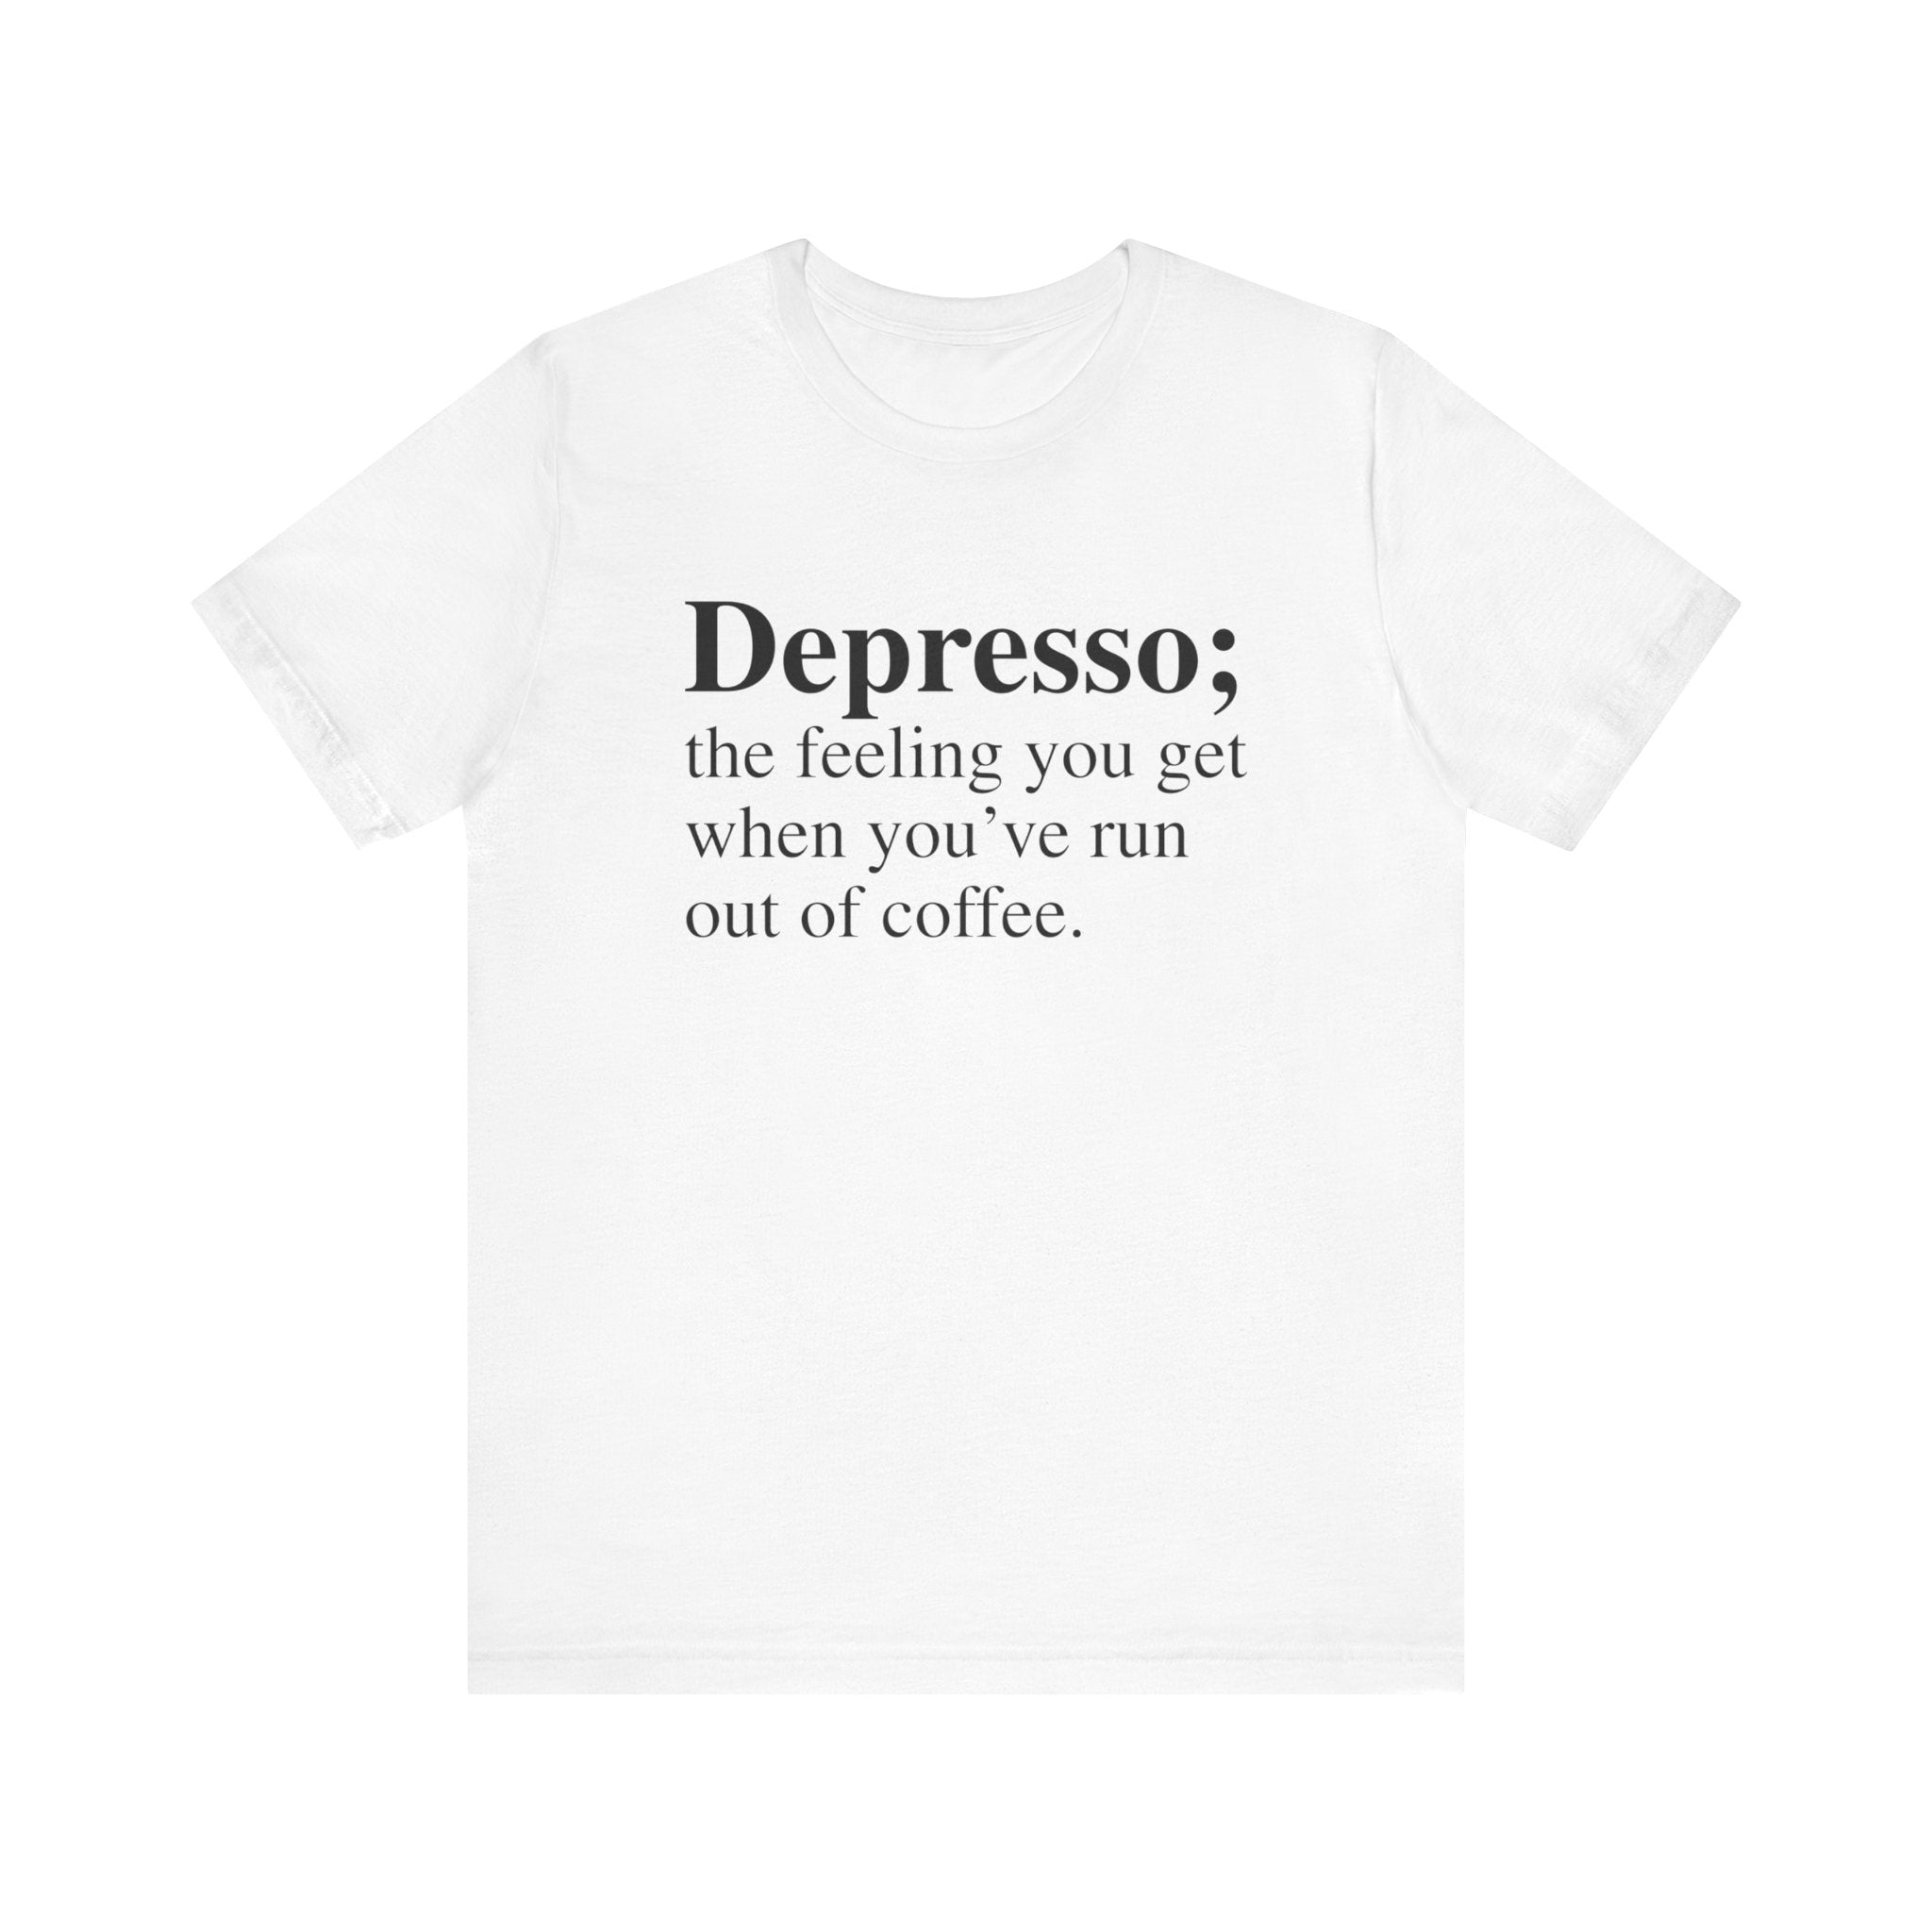 Depresso T-Shirt with white soft cotton, featuring black text that reads "Depresso; the feeling you get when you’ve run out of coffee.